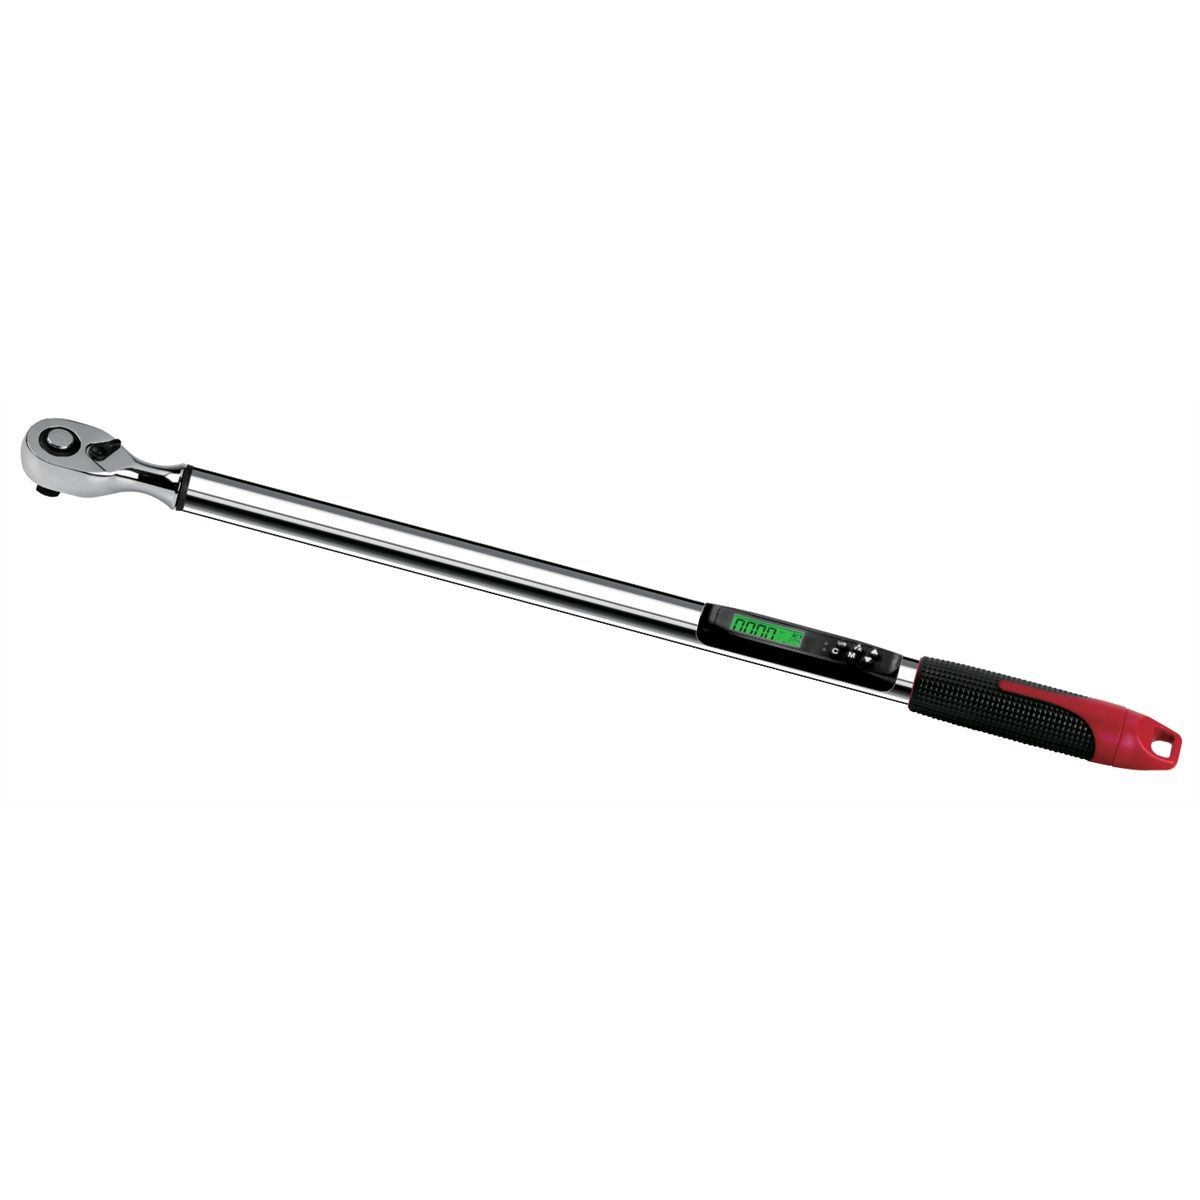 ARM303-4A 1/2-inch Angle Digital Torque Wrench